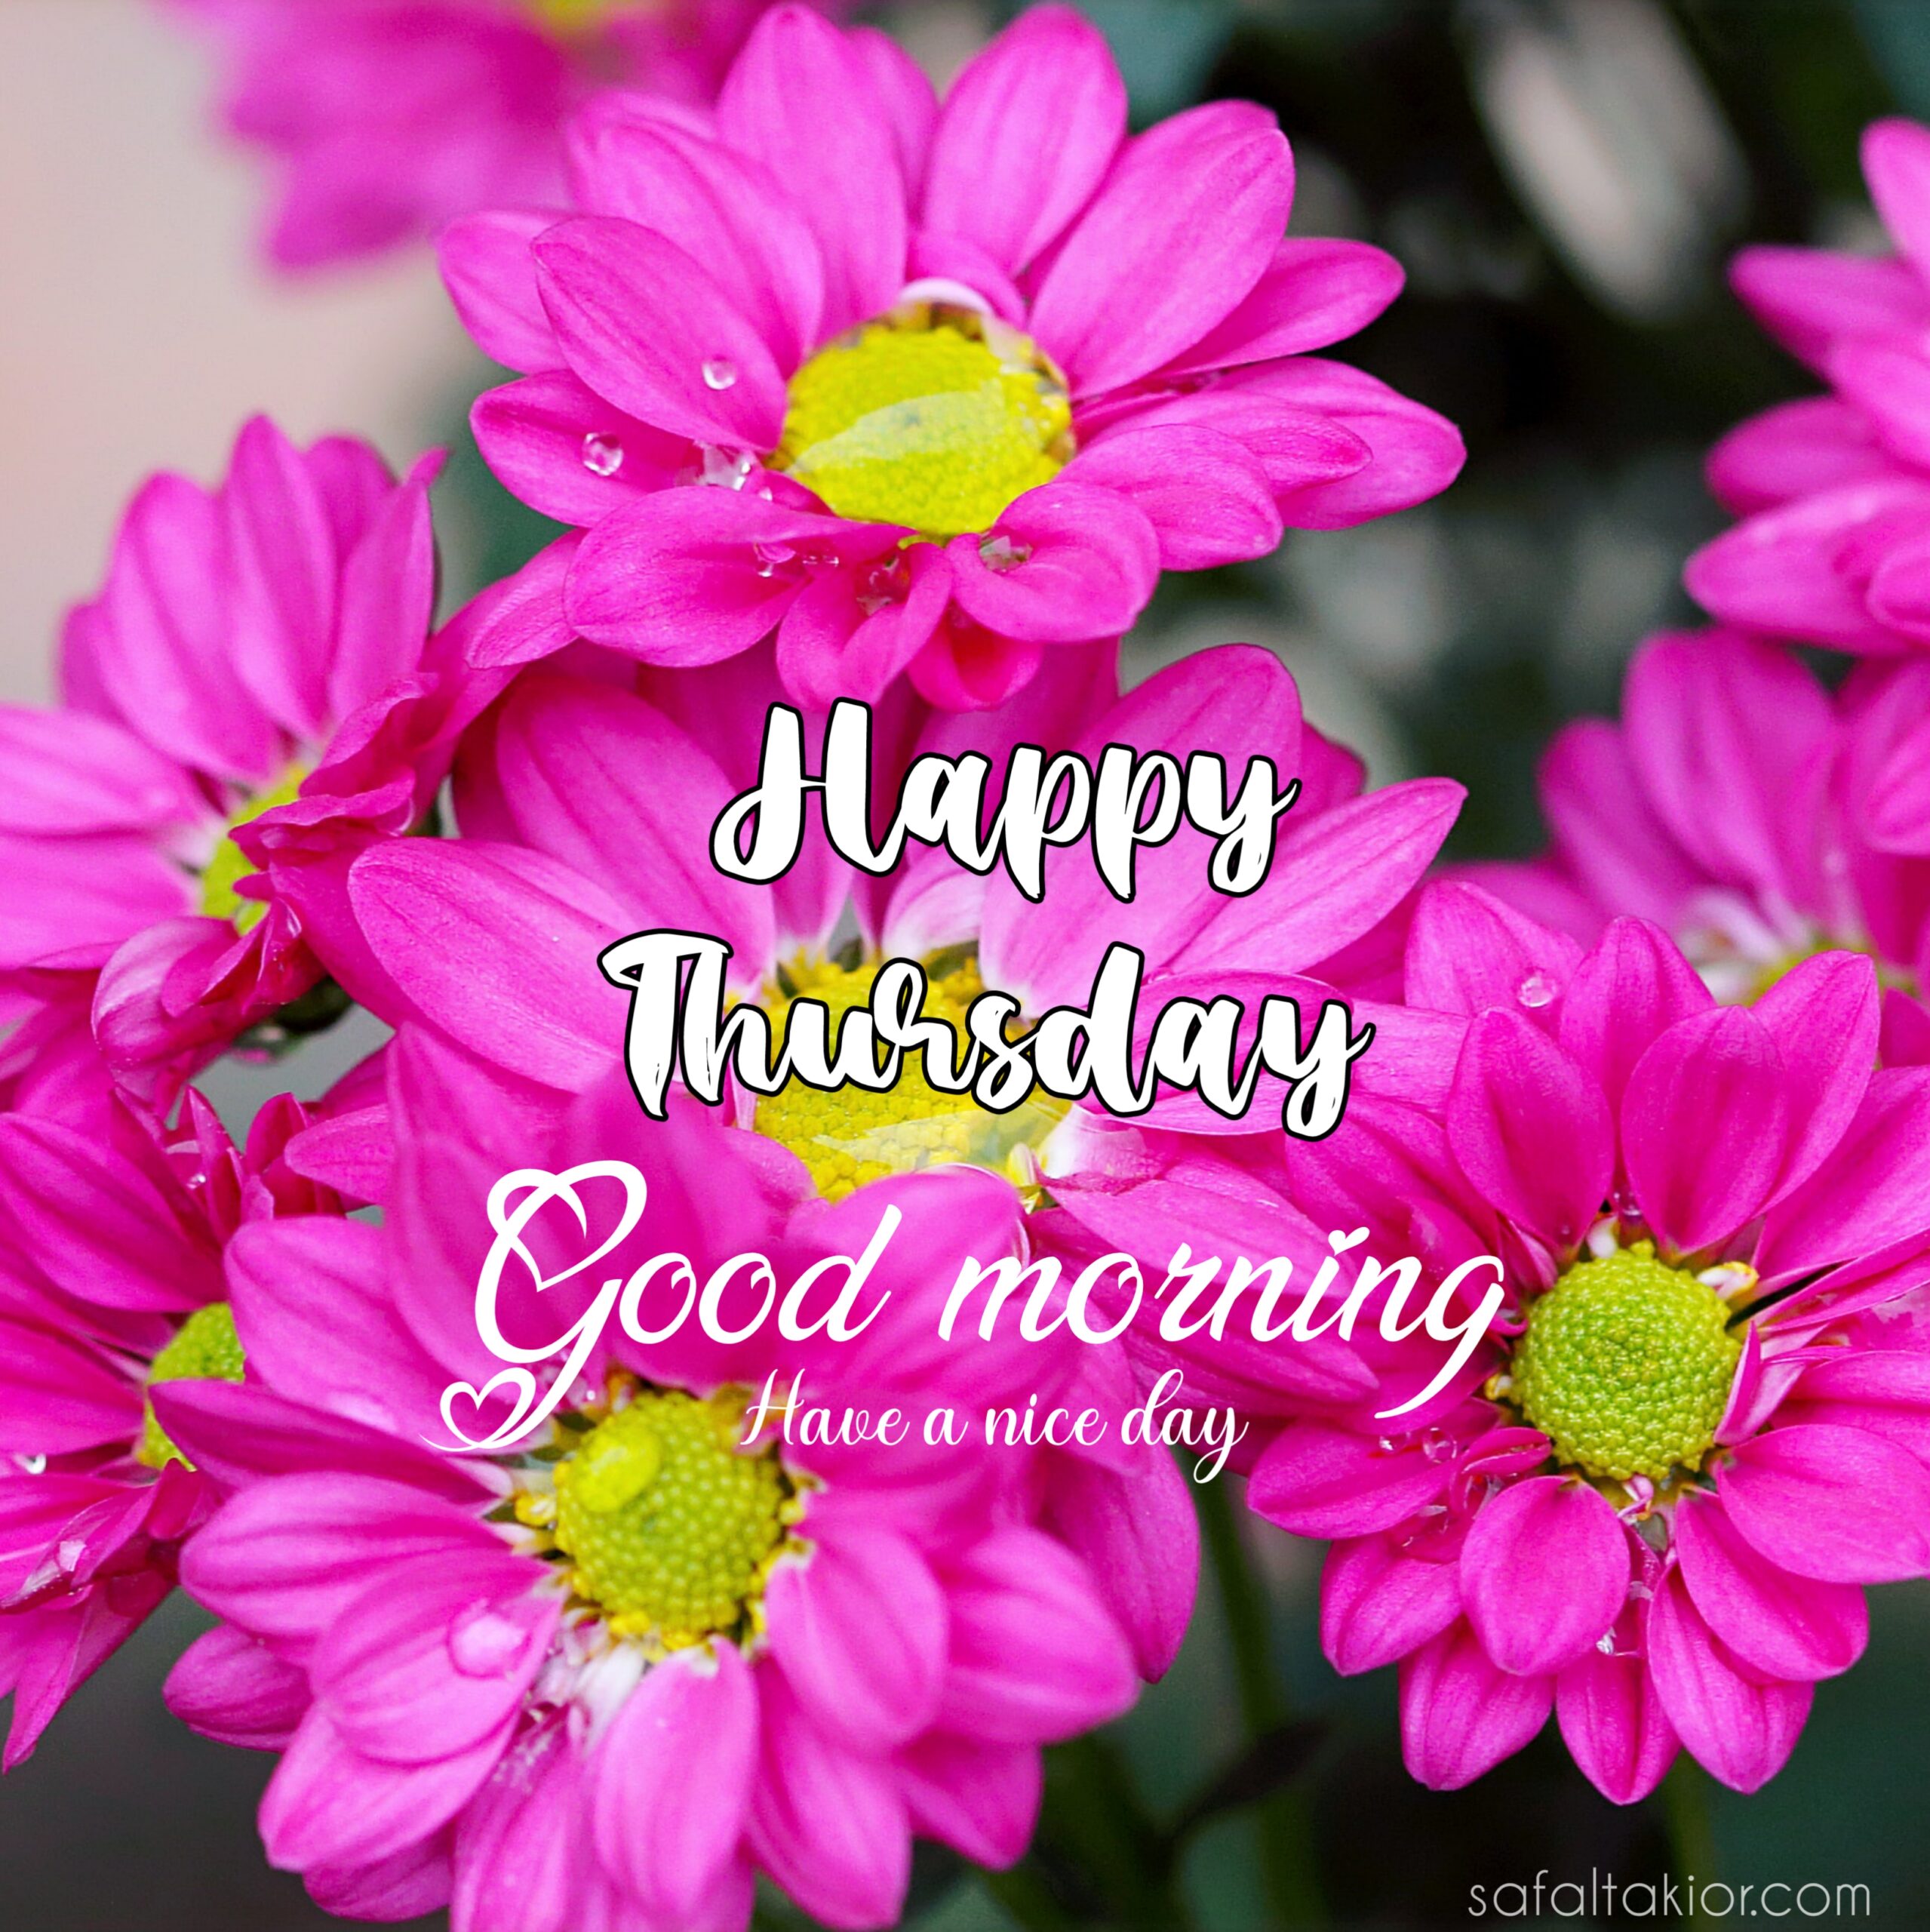 Happy thursday images